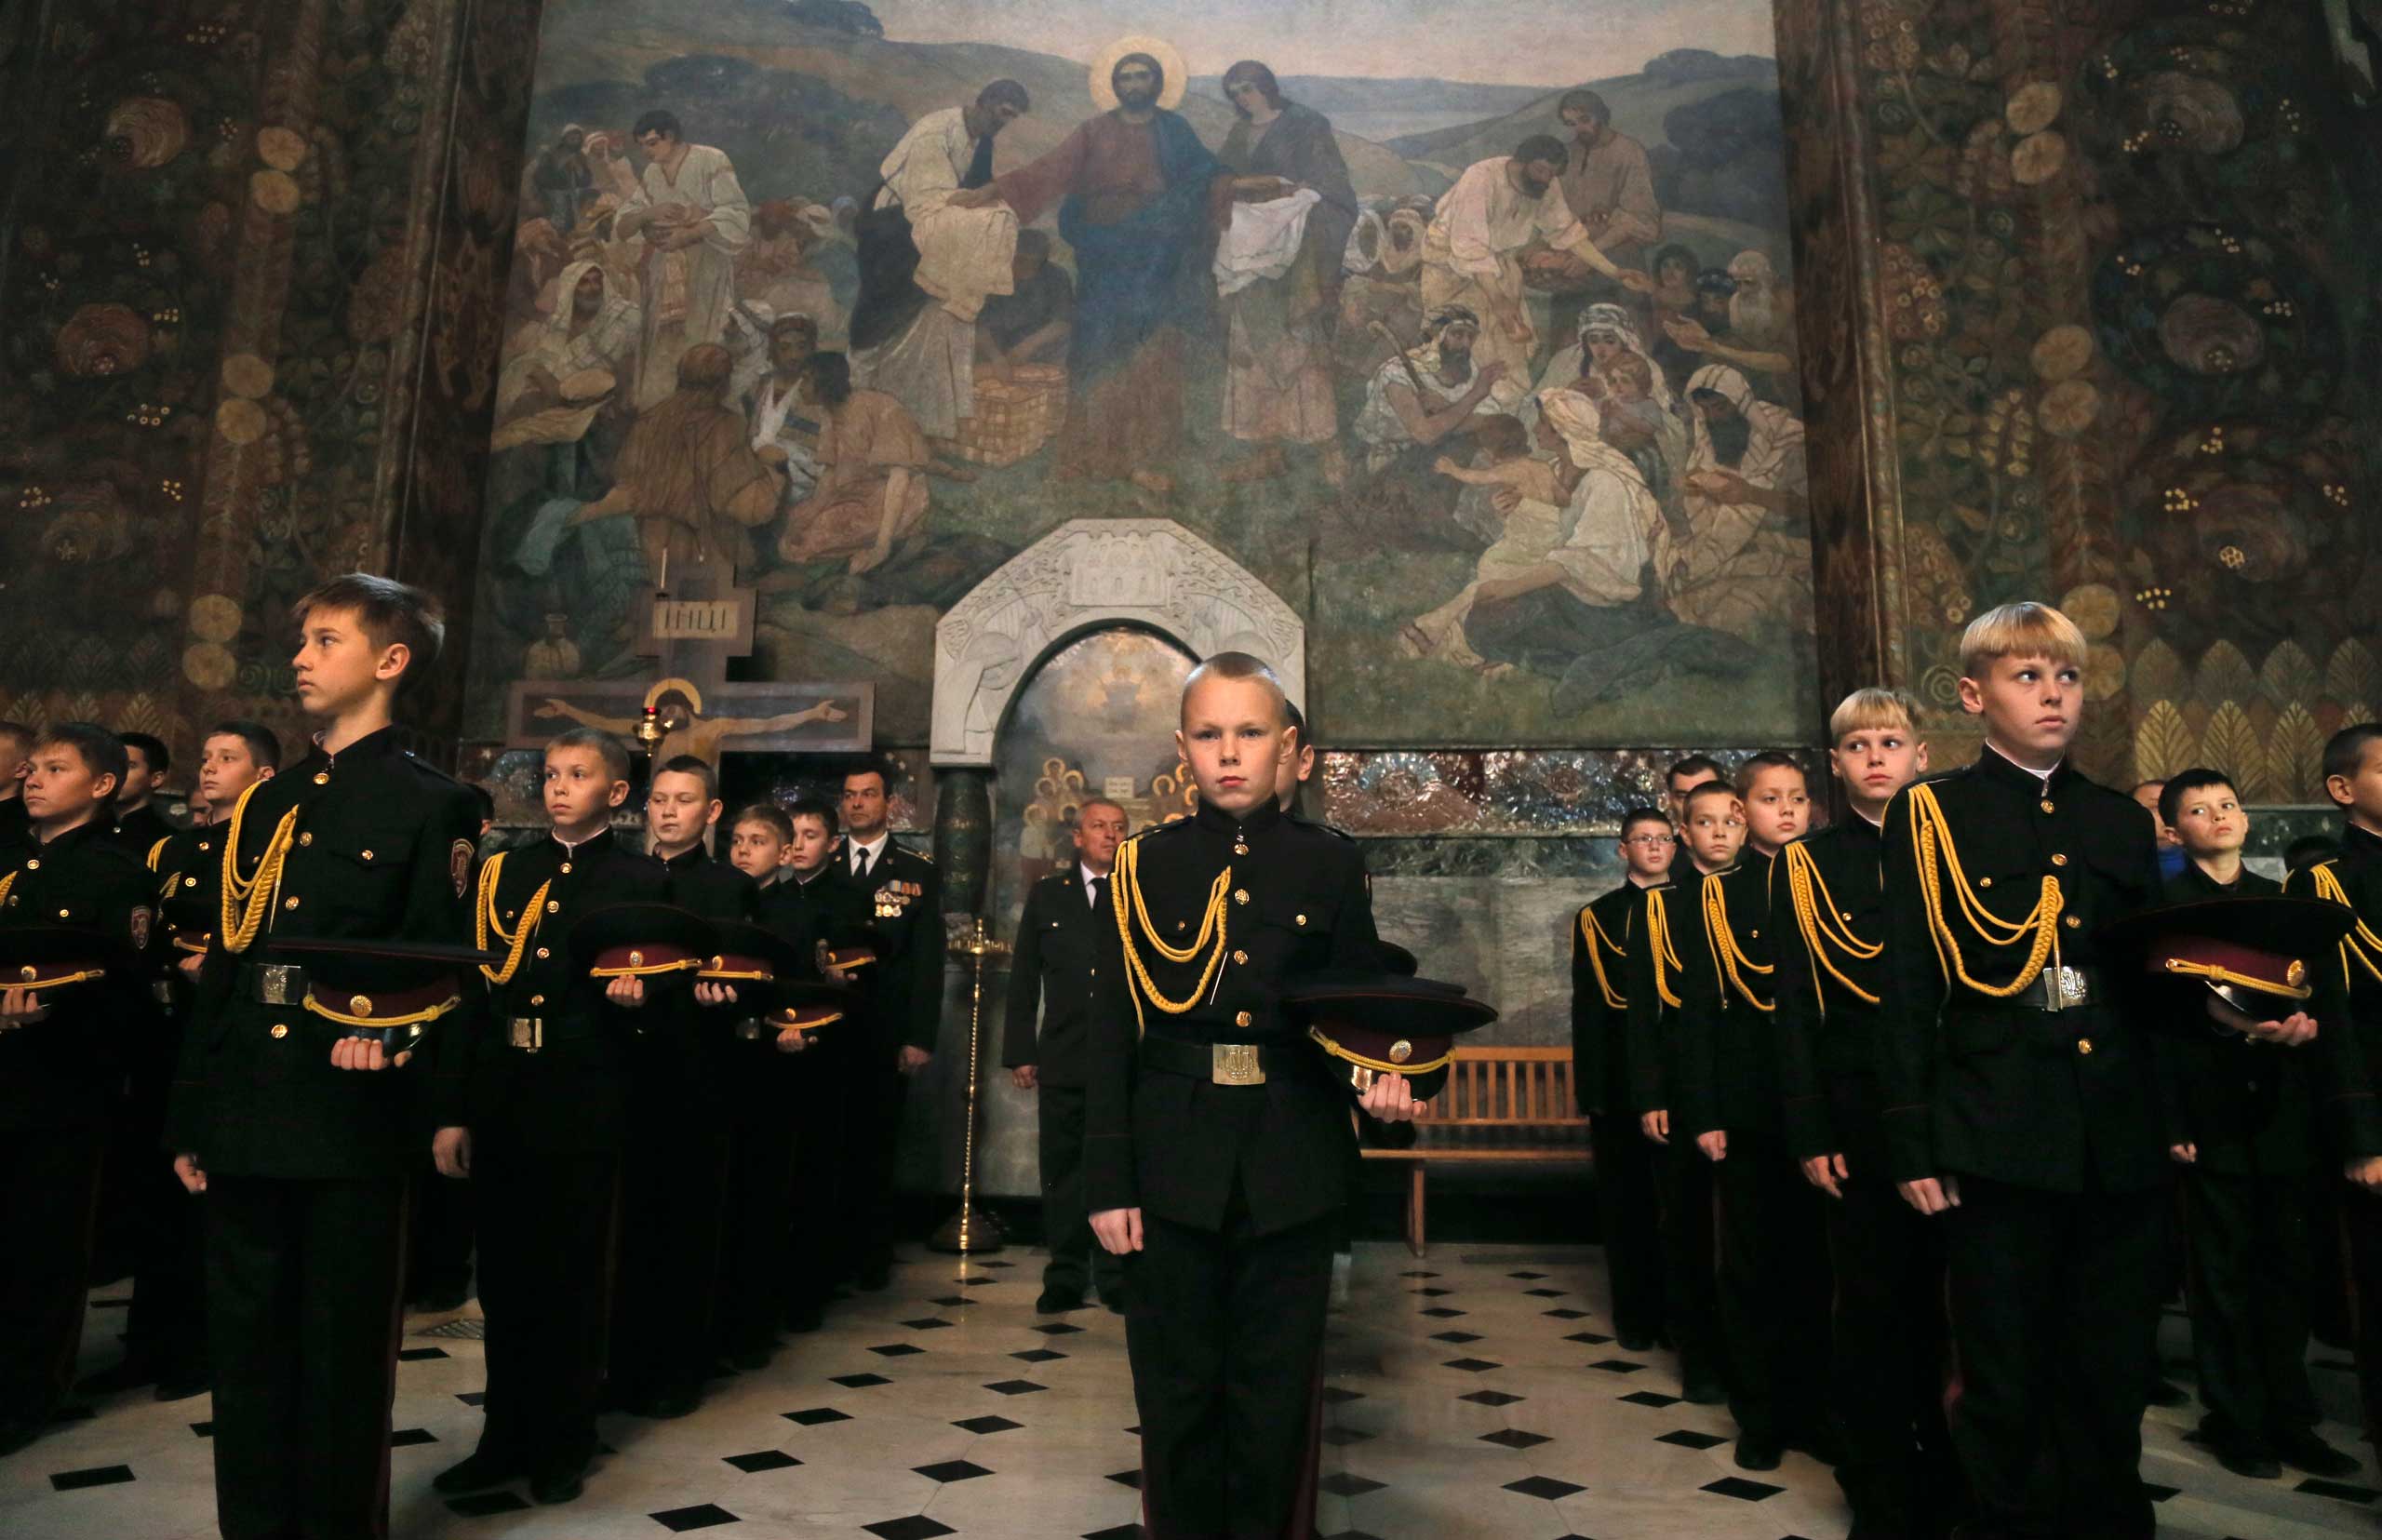 Nov. 14, 2014. Boys from a Ukrainian cadet's lyceum pray during the initiation ceremony in Orthodox Monastery of Caves in Kiev, Ukraine.